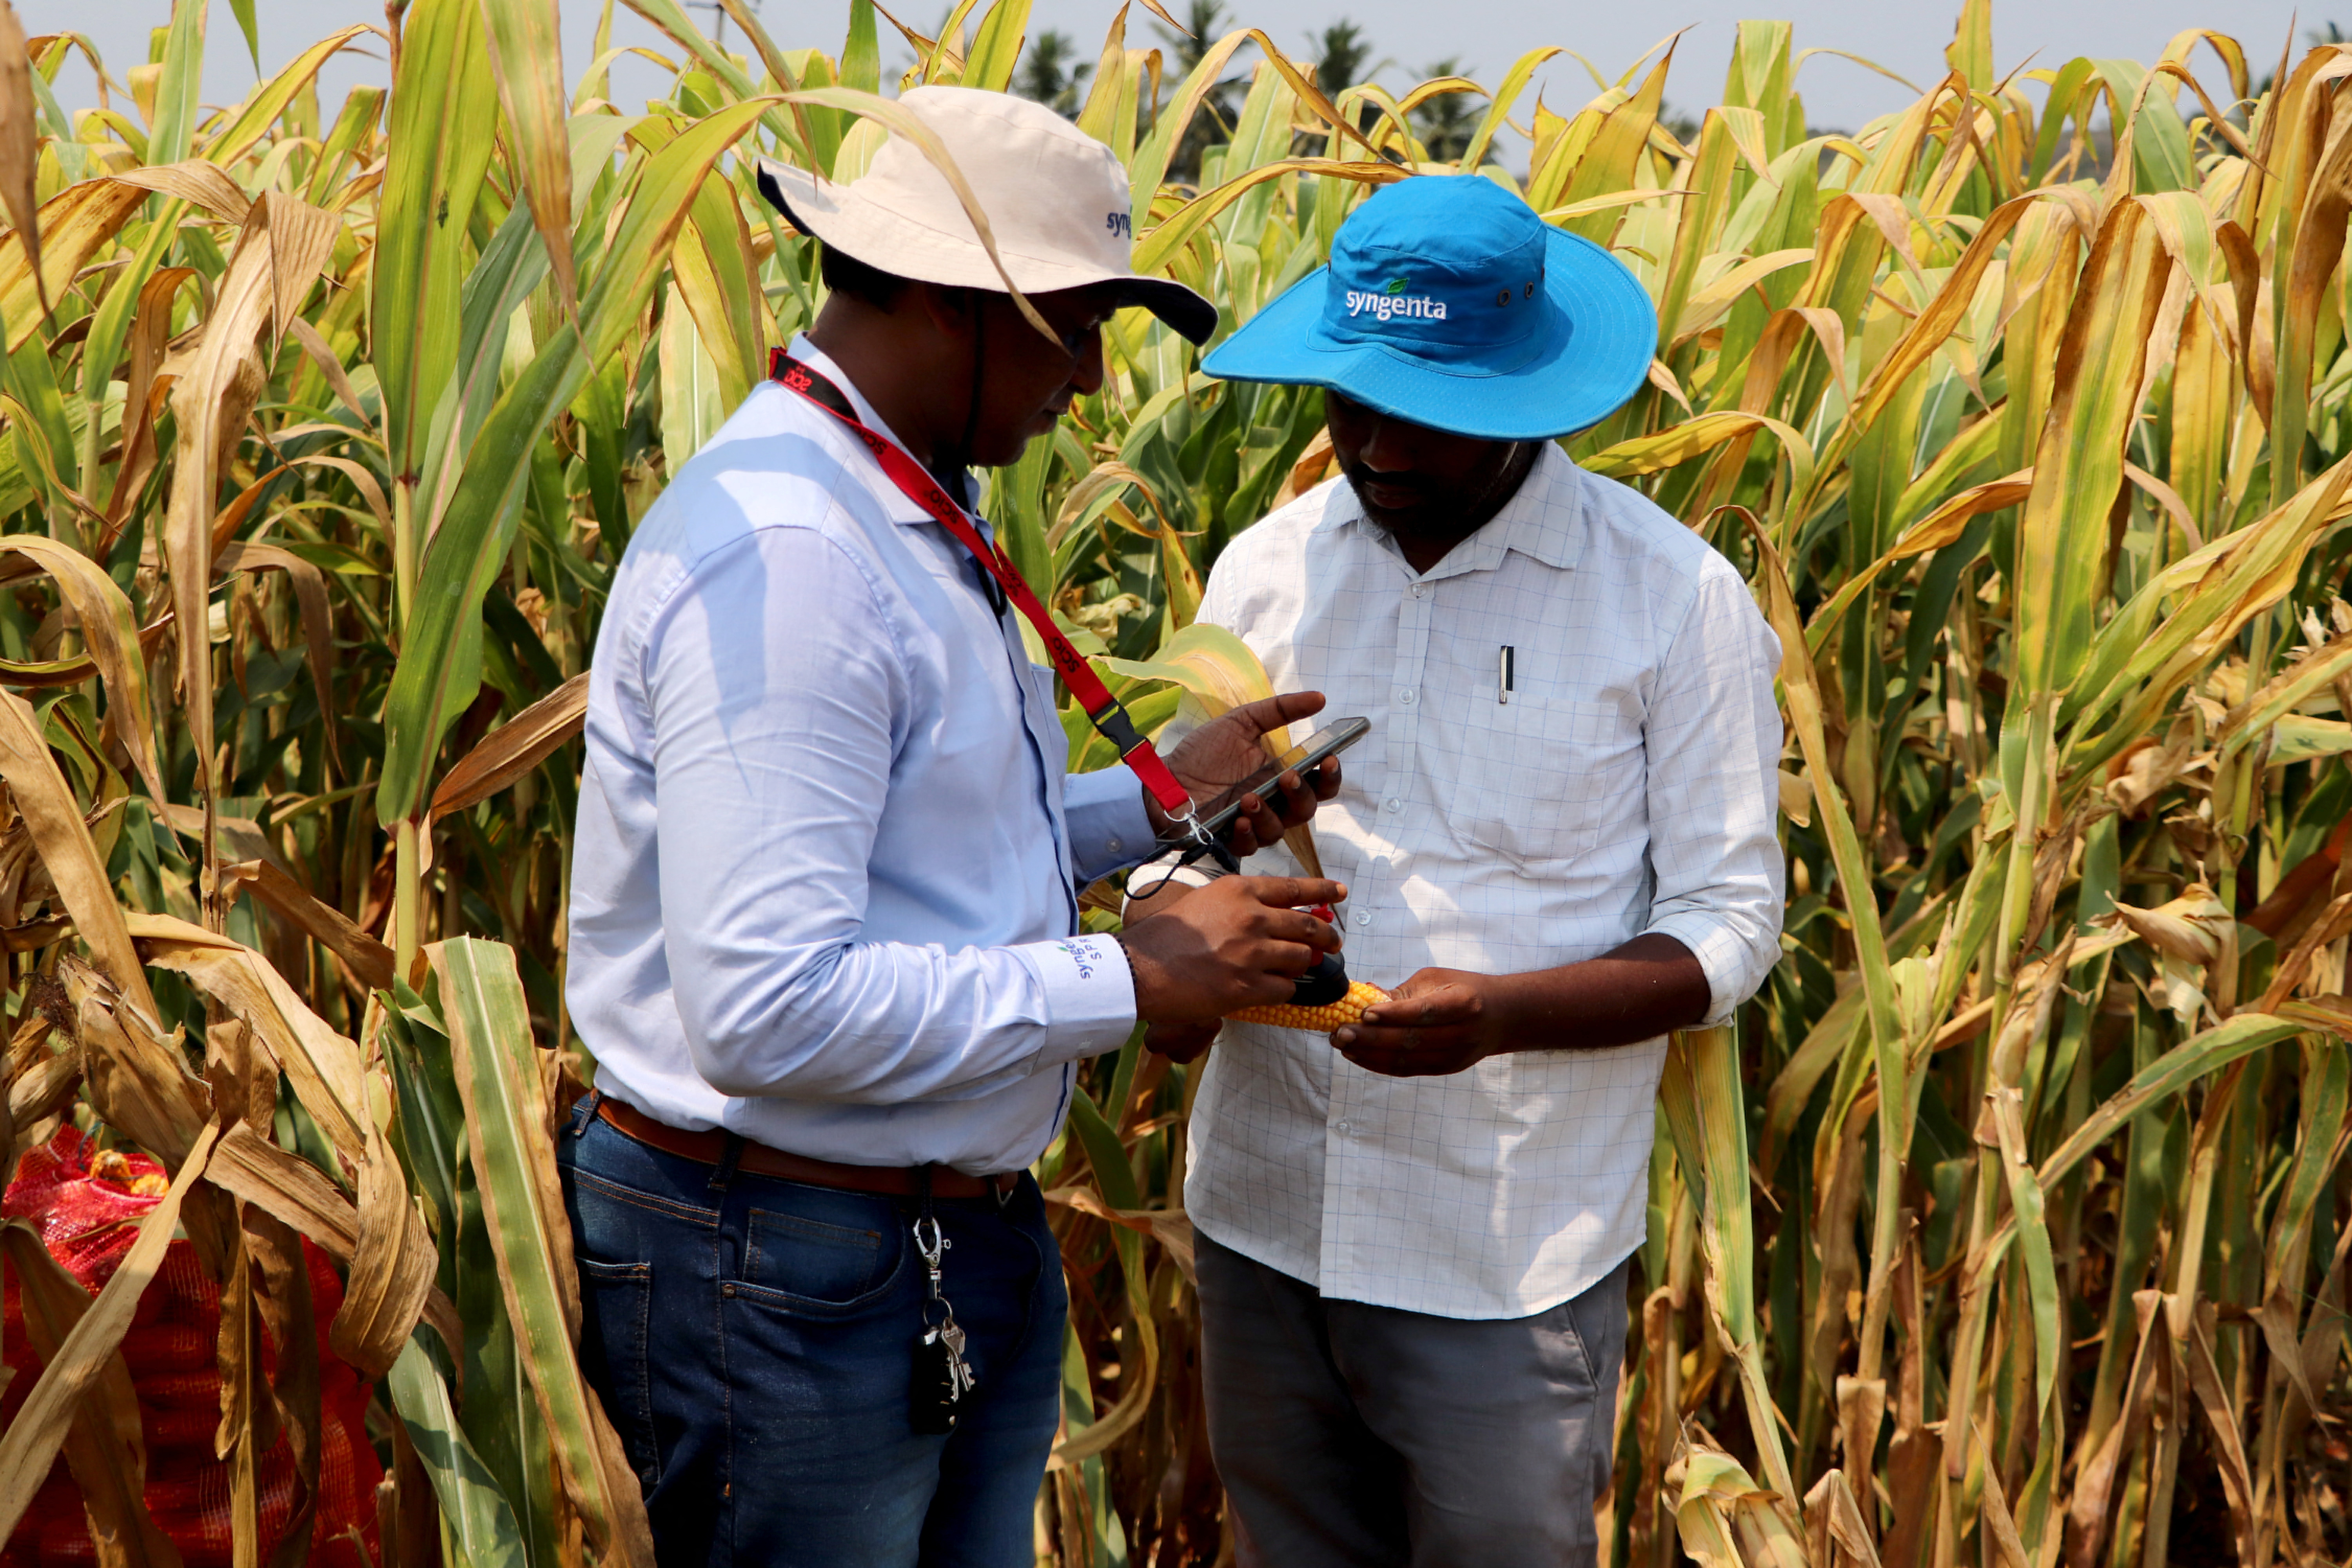 Employees of Syngenta examine corn with a moisture-meter device to check if the crop is ready for harvest, in a corn field in Krishna district